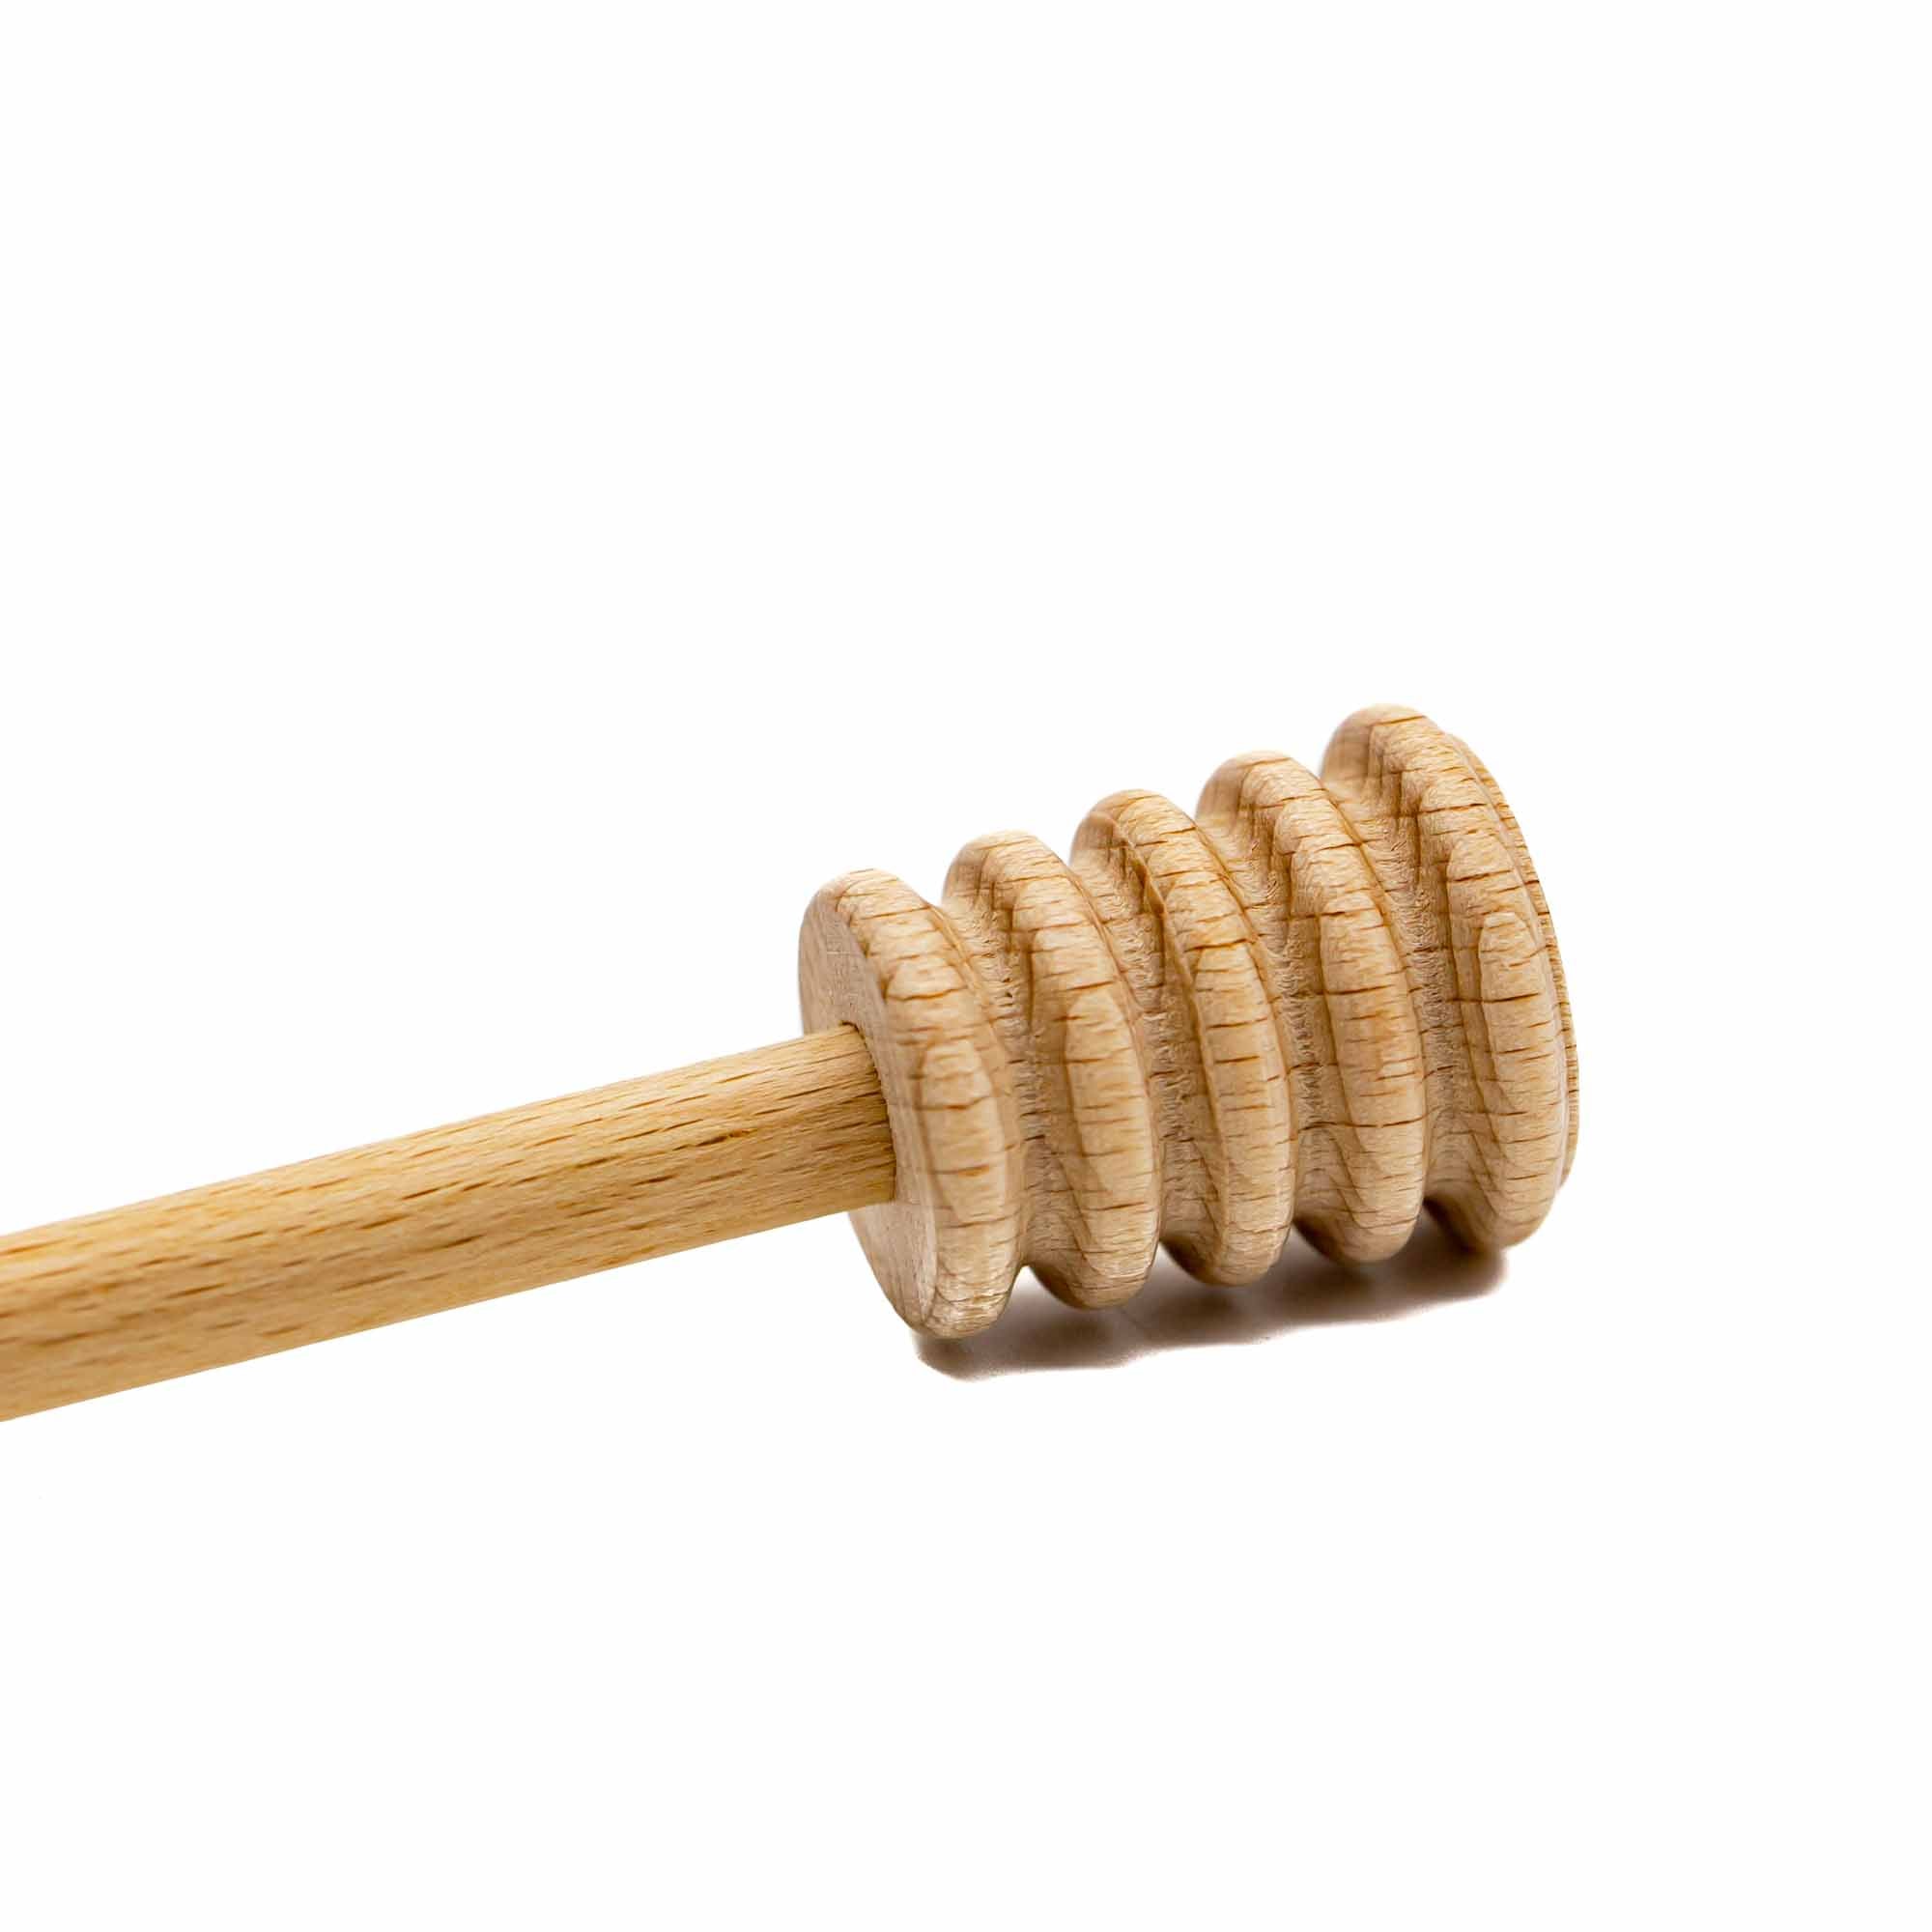 Wooden Honey Dipper - Mortise And Tenon